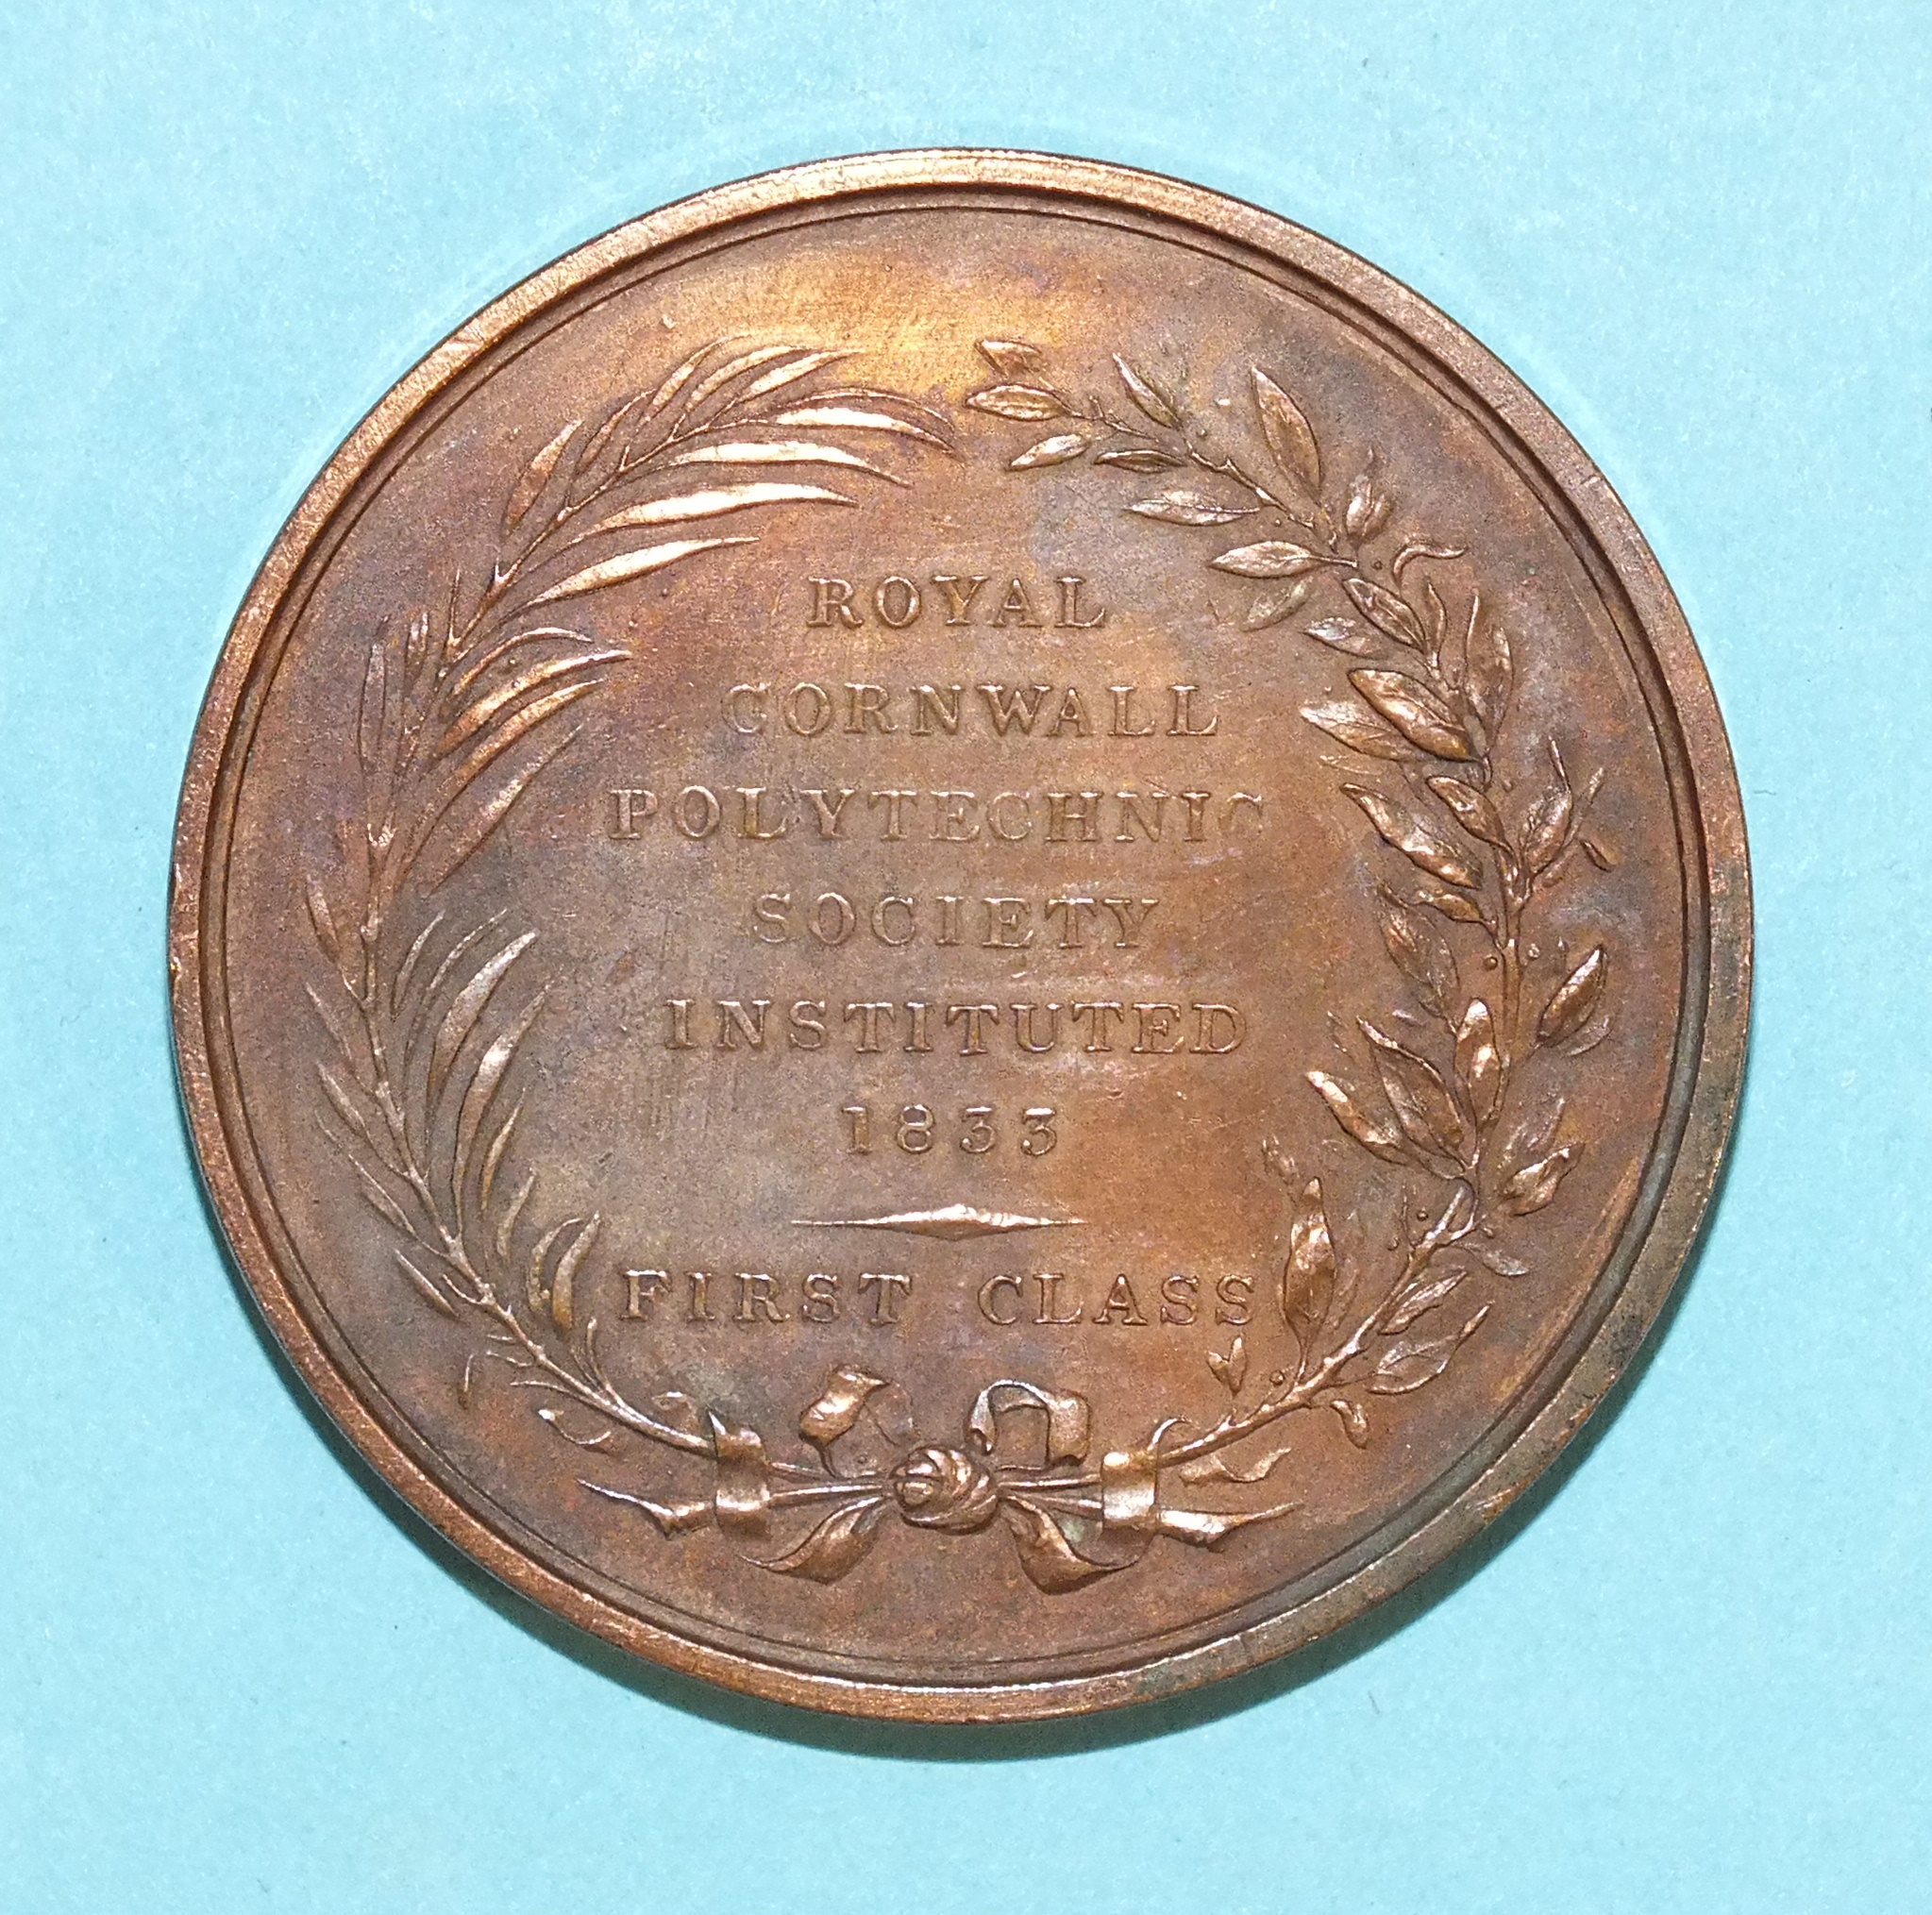 A British Academic Medal, Bronze 4.5cm wide, Royal Cornwall Polytechnic Society First Class James - Image 2 of 2